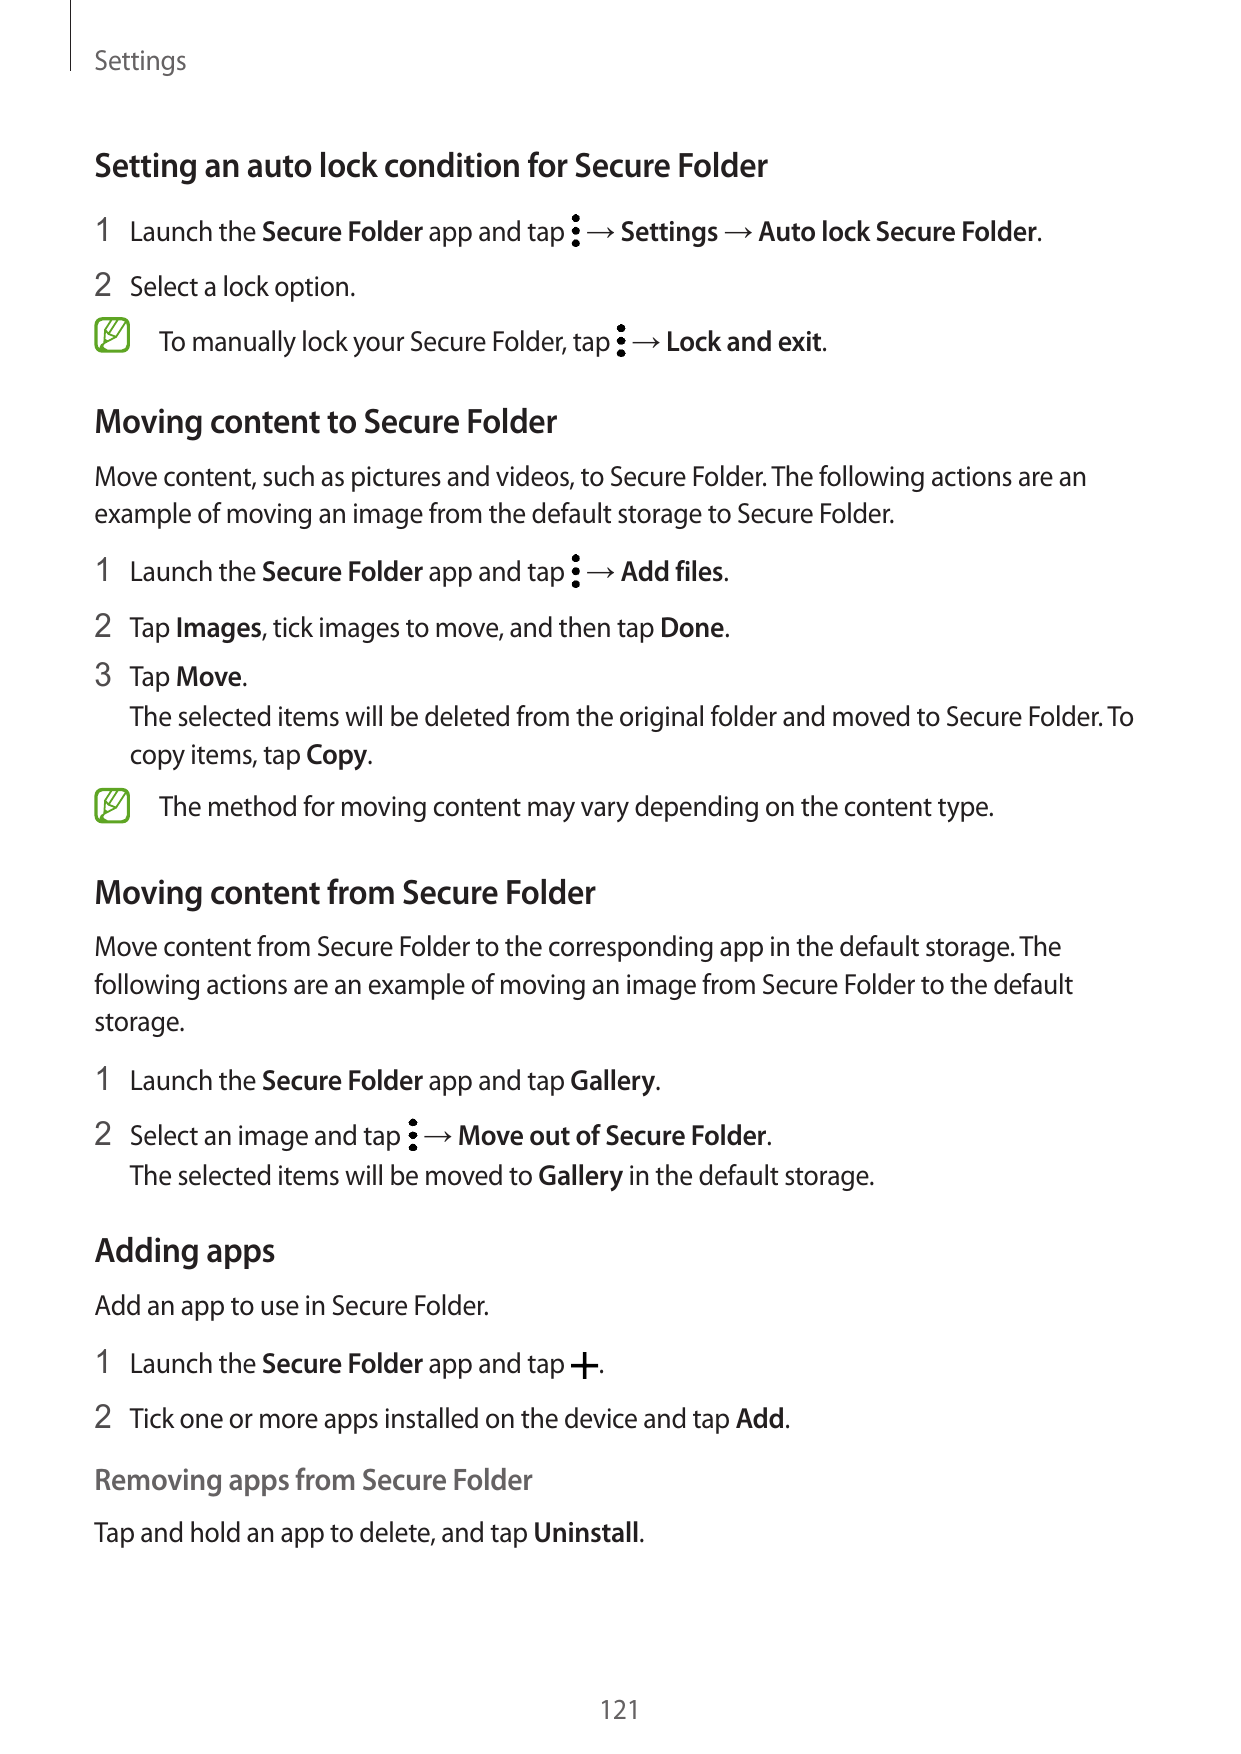 SettingsSetting an auto lock condition for Secure Folder1 Launch the Secure Folder app and tap → Settings → Auto lock Secure Fol